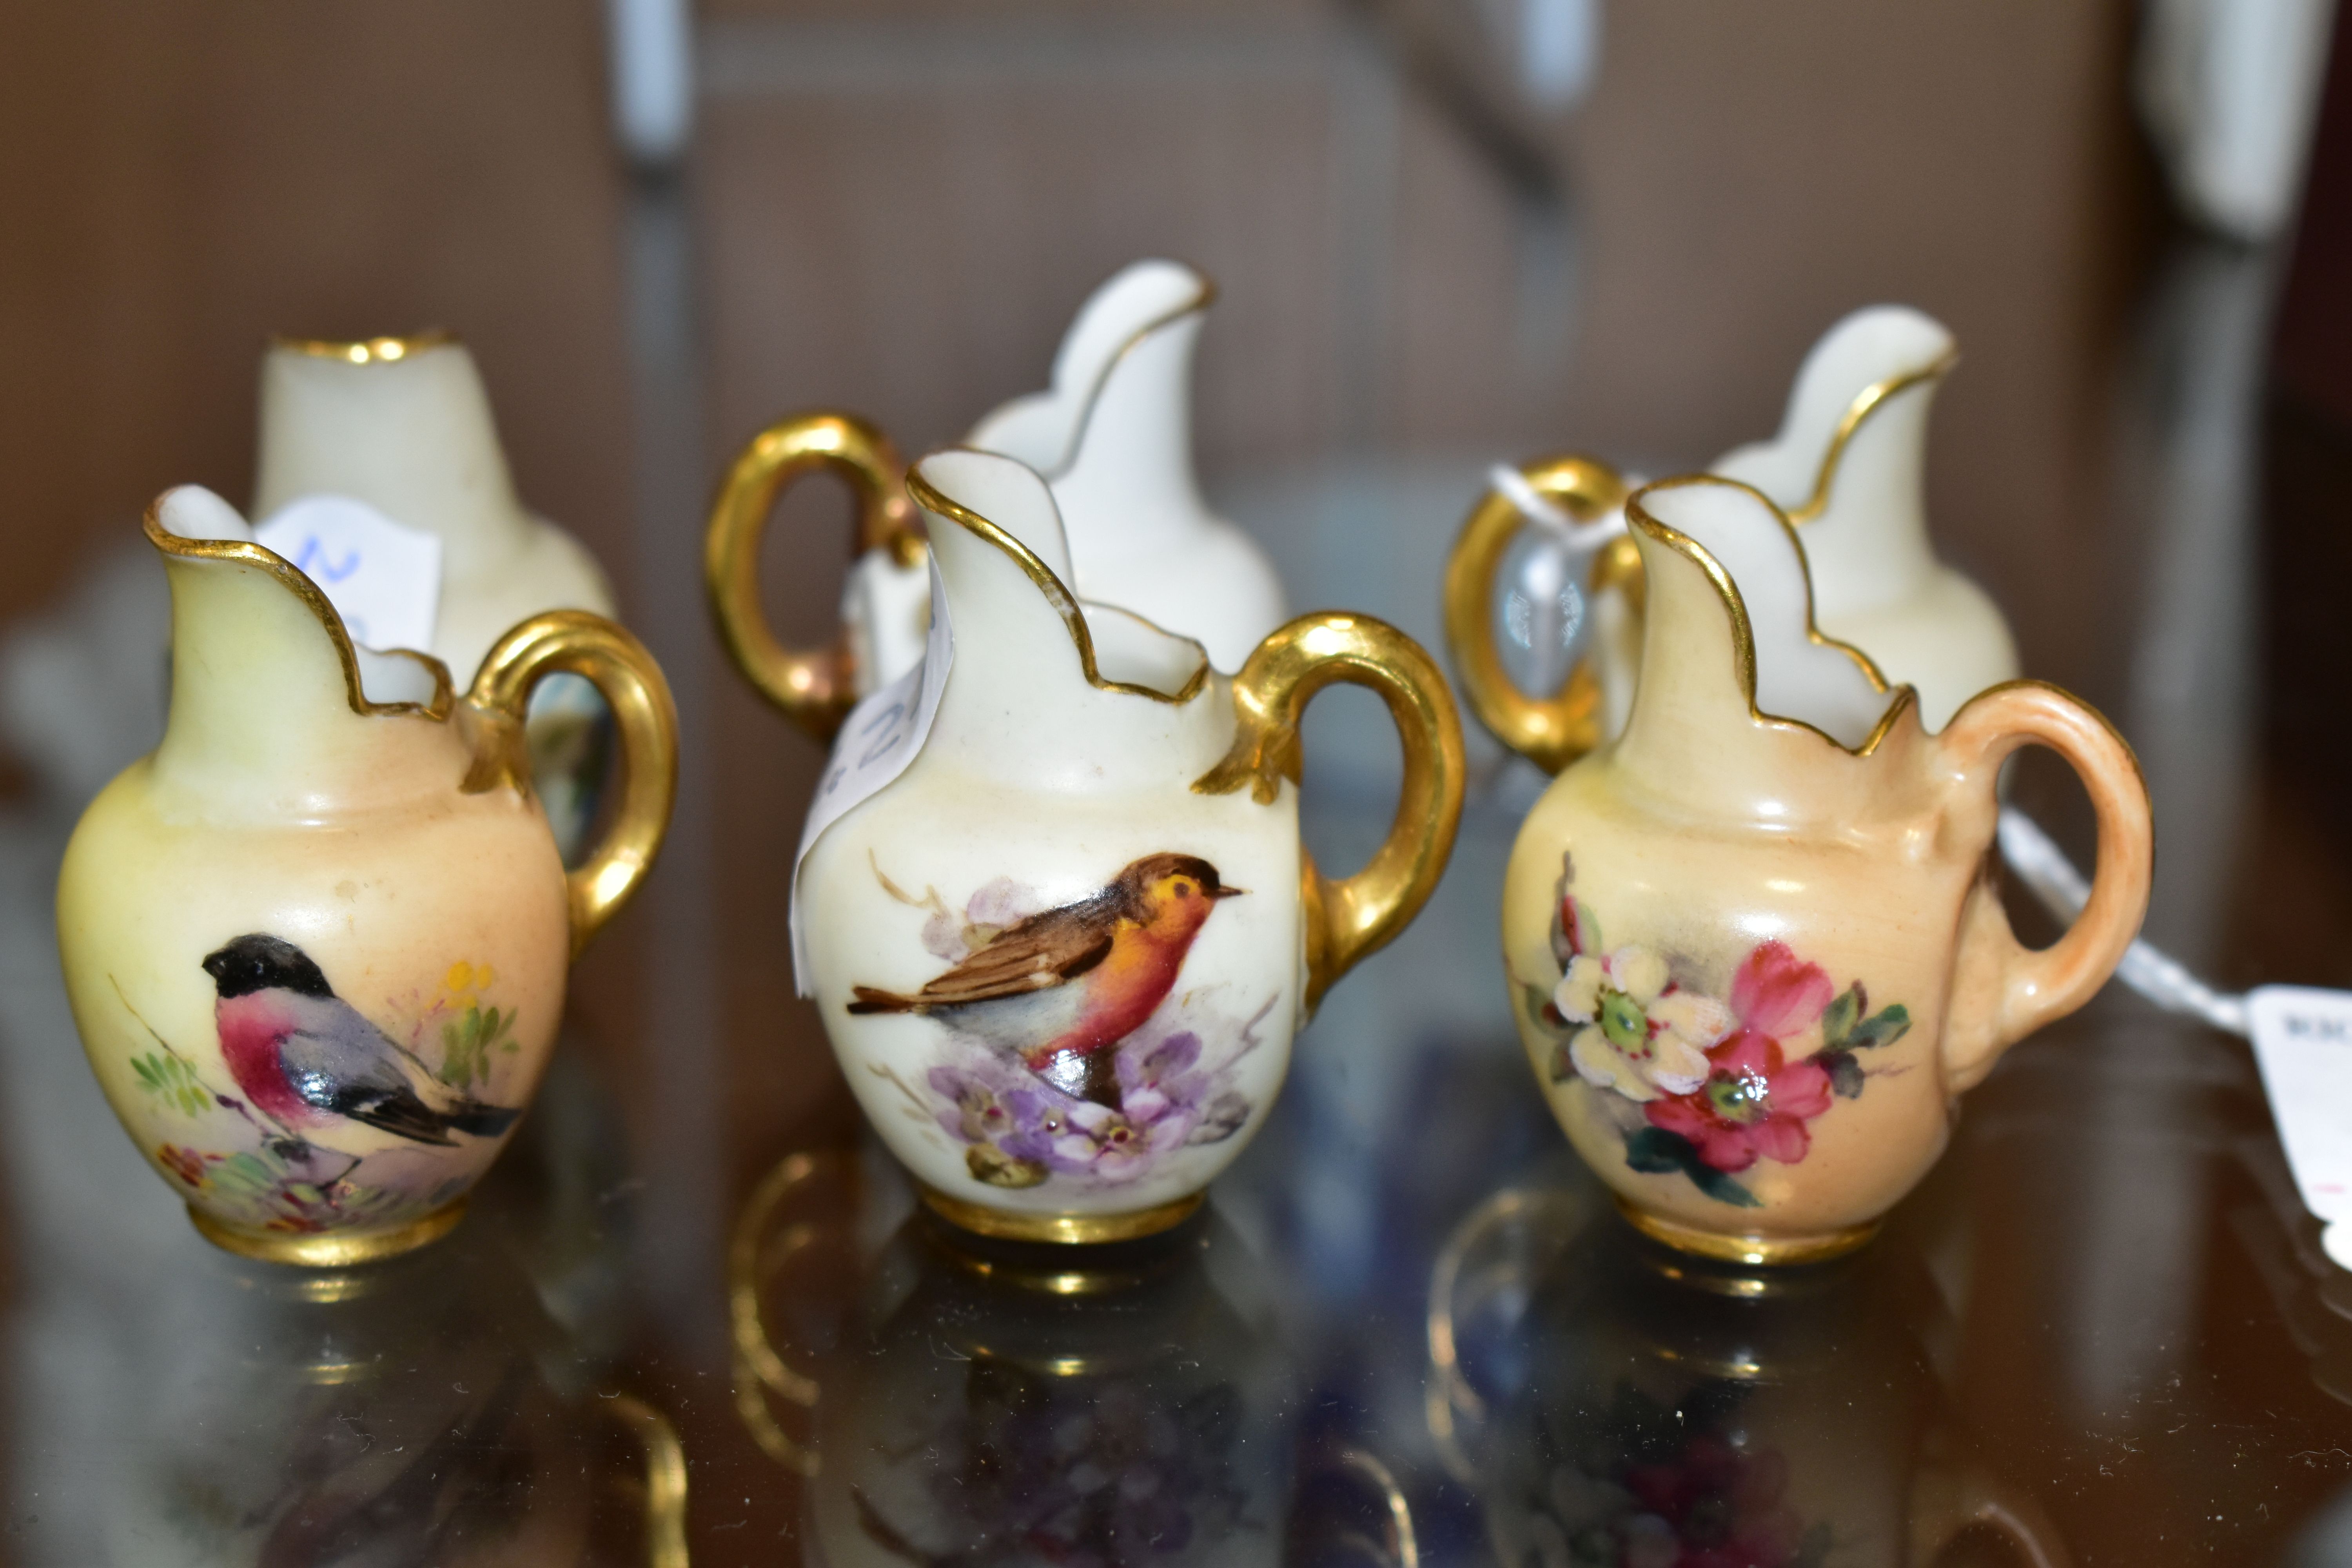 SIX ROYAL WORCESTER MINIATURE JUGS, three painted with British Birds - Bull Finch, Blue Tit and - Image 3 of 3